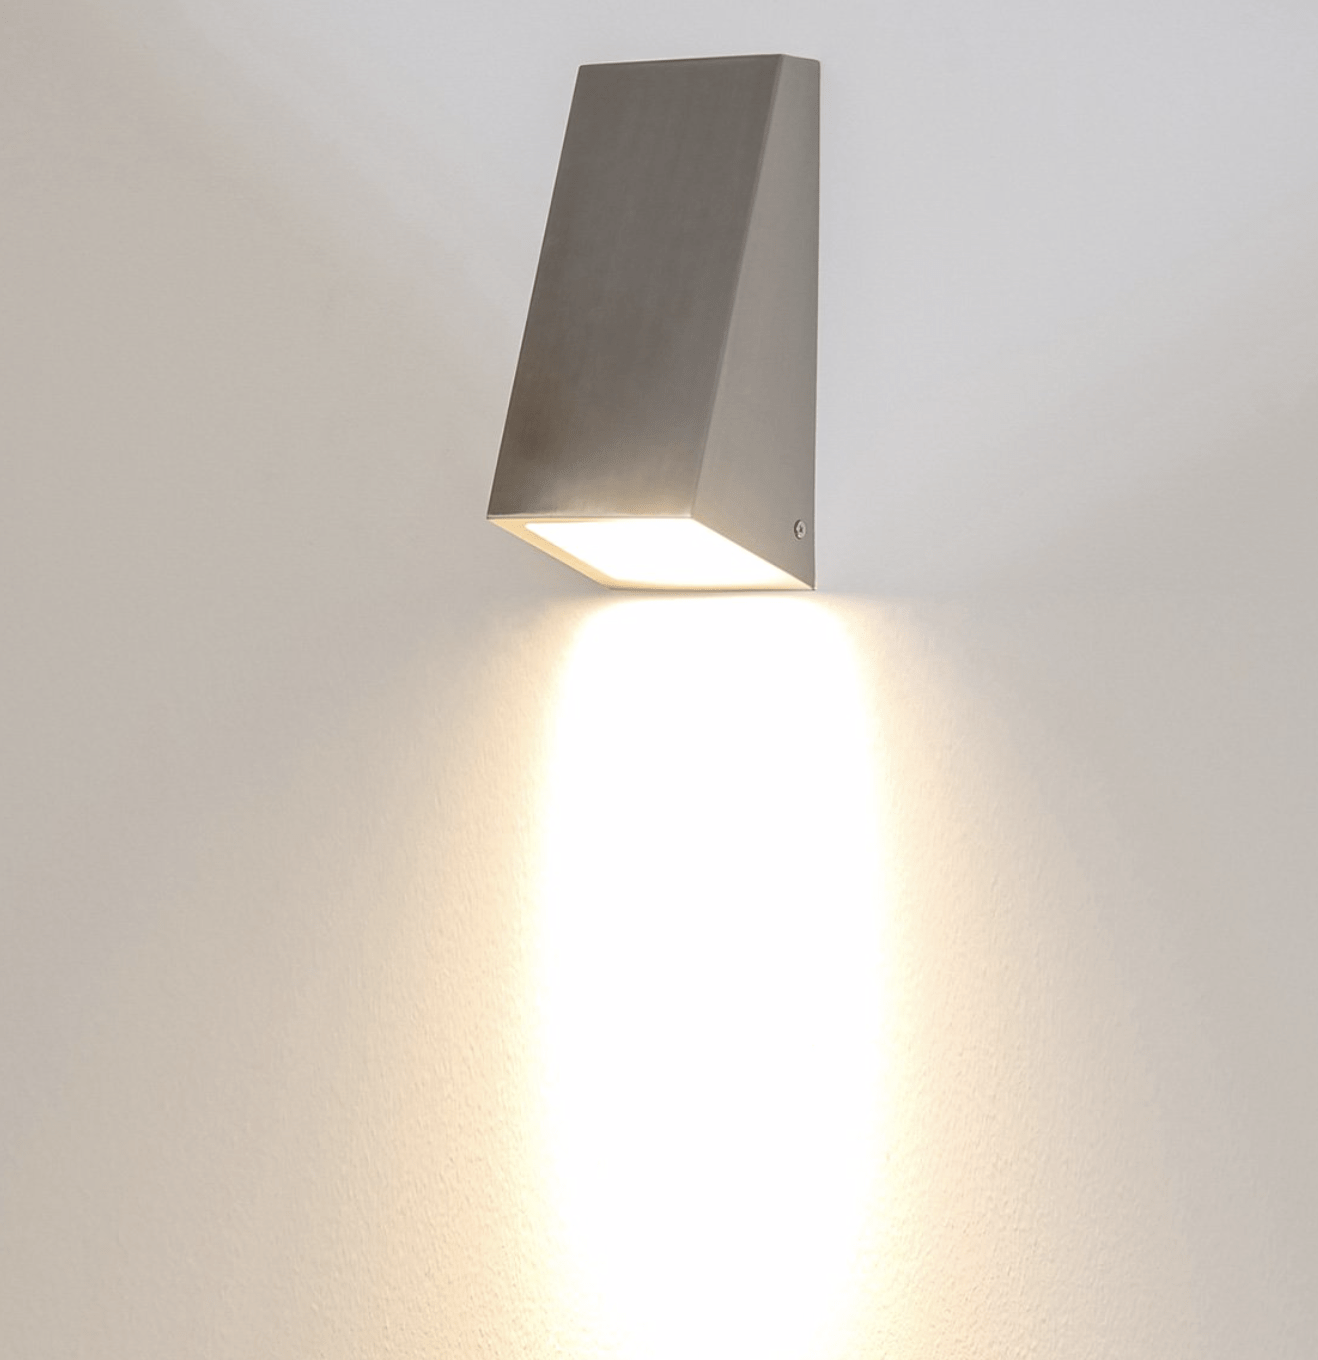 Exterior Wall Light Taper - Large Wall Wedge Lighting Shops